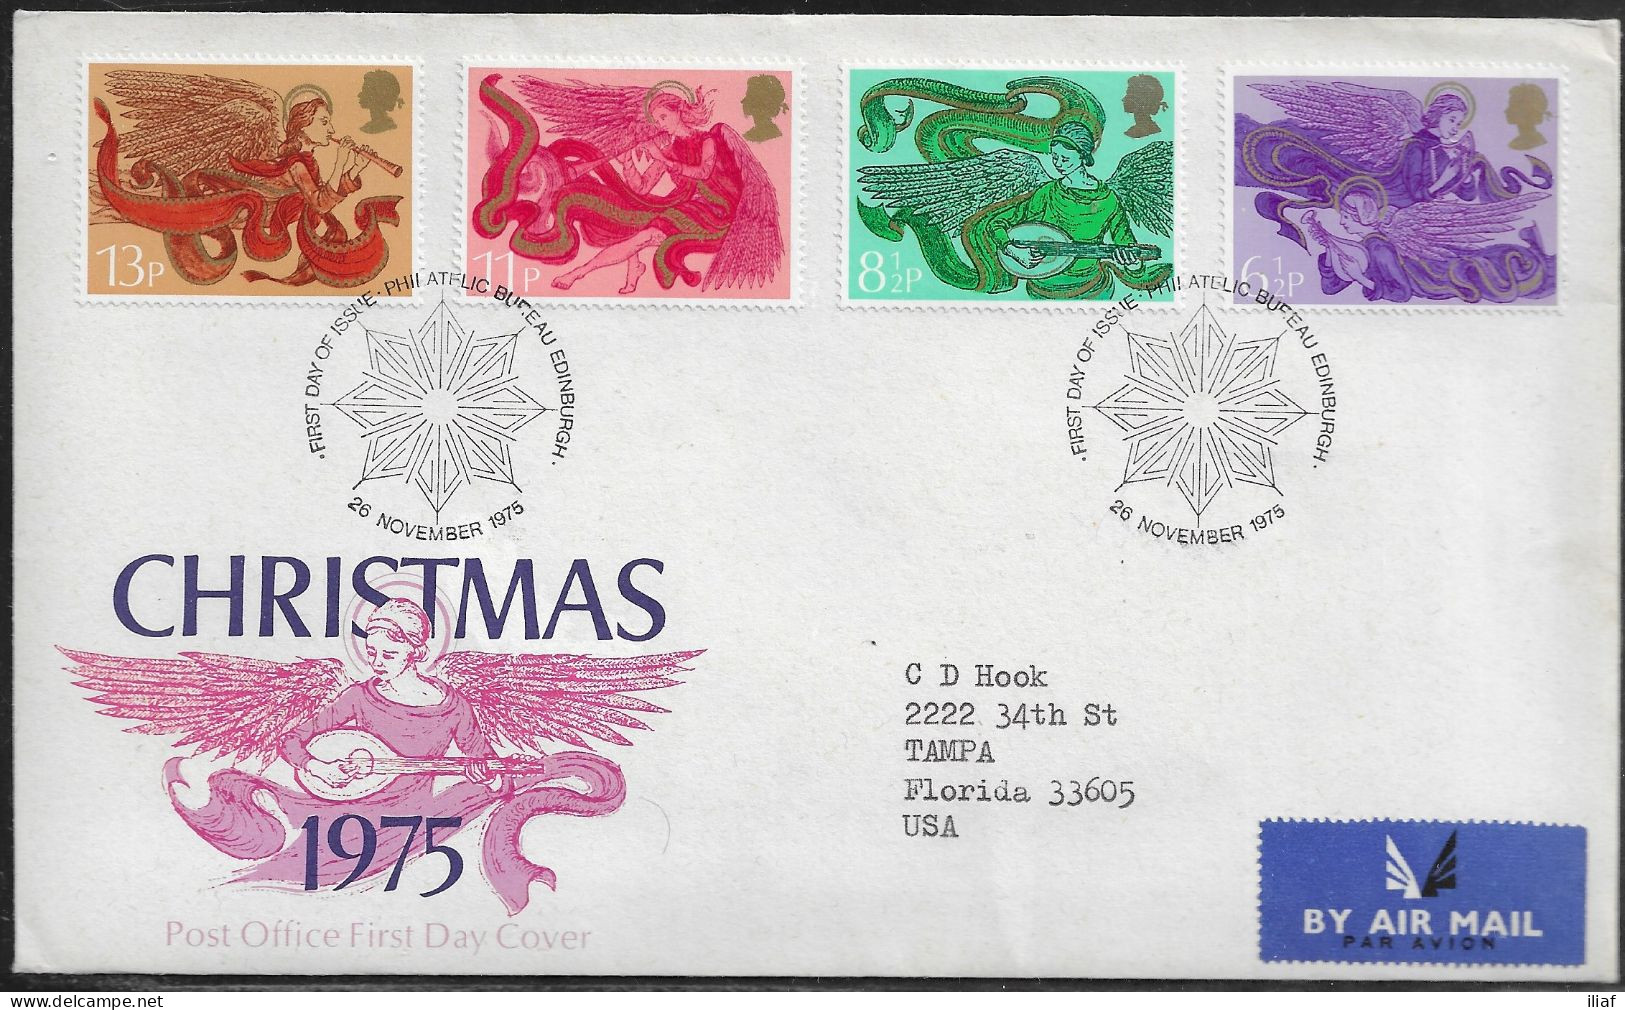 United Kingdom Of Great Britain.  FDC Sc. 758-761.  Christmas 1975 - Angels.  FDC Cancellation On FDC Envelope - 1971-1980 Em. Décimales